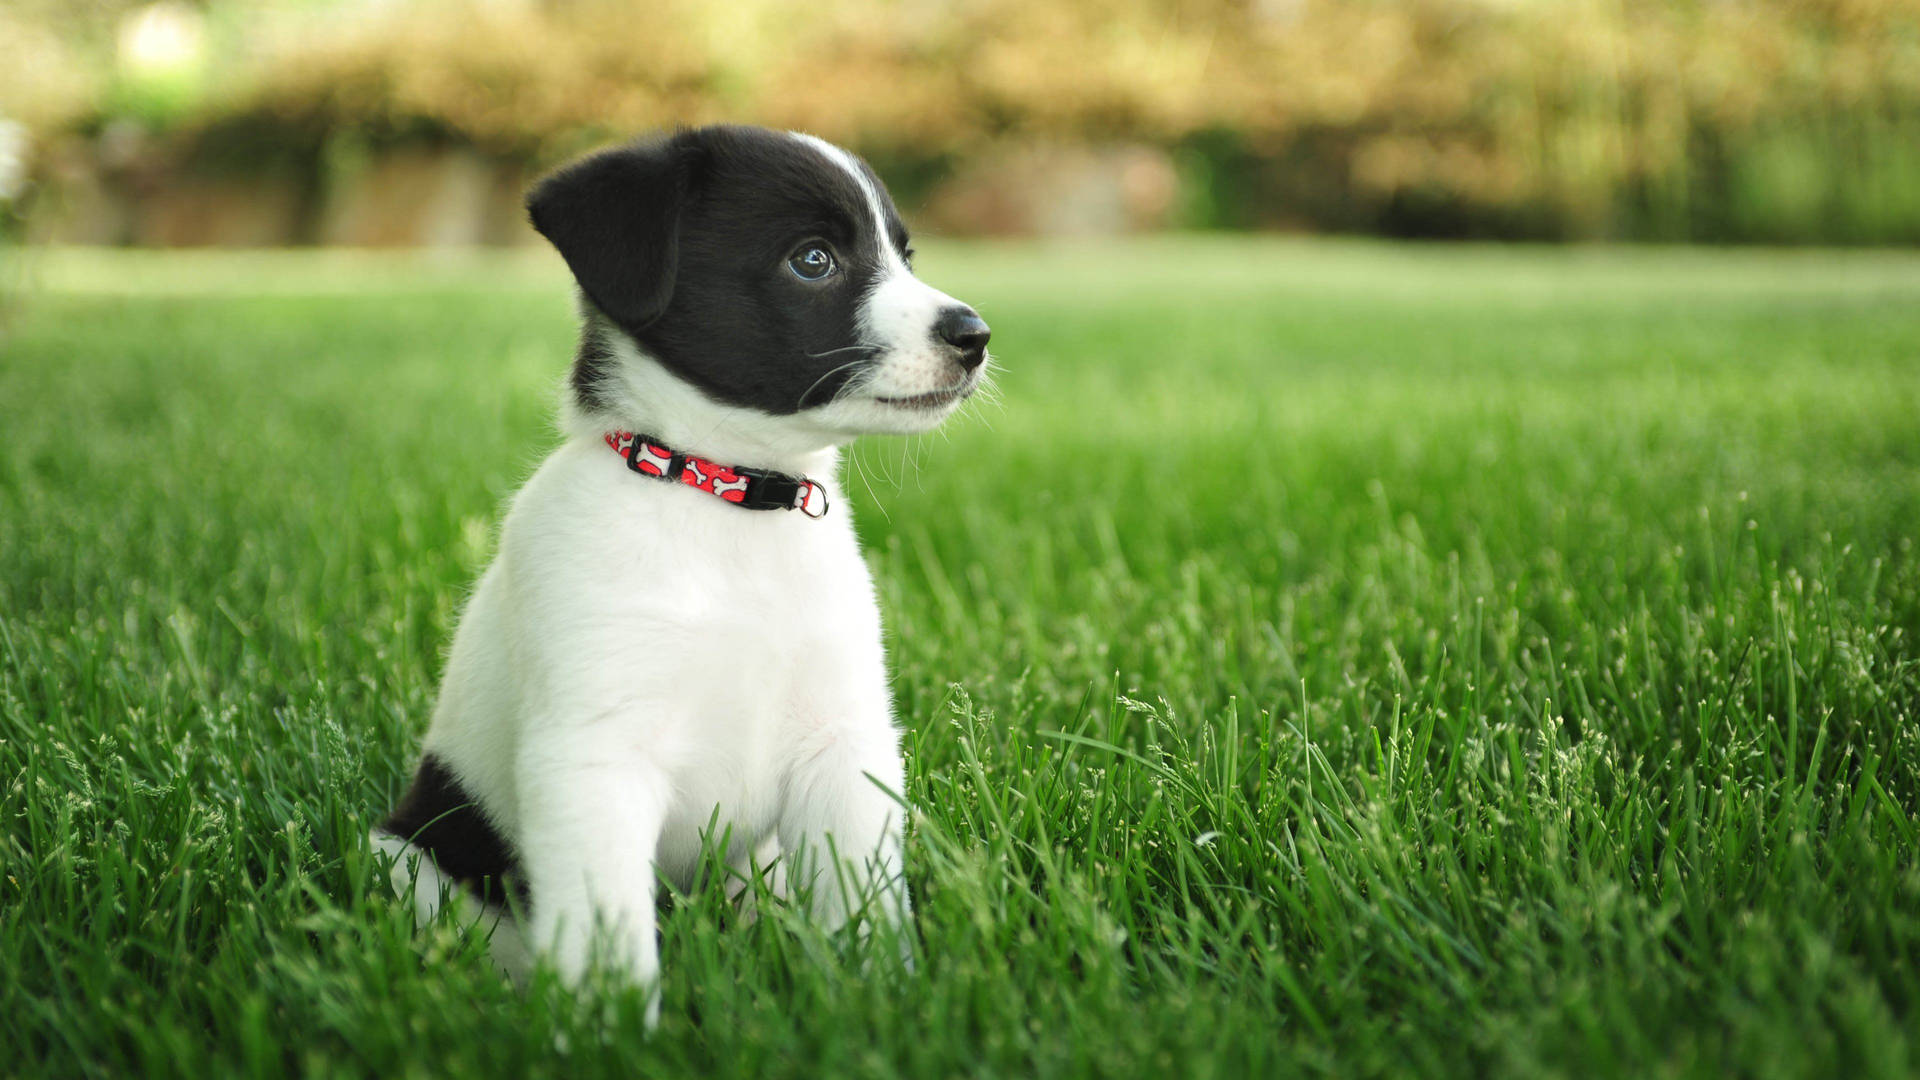 Puppy On A Mowed Grass Background